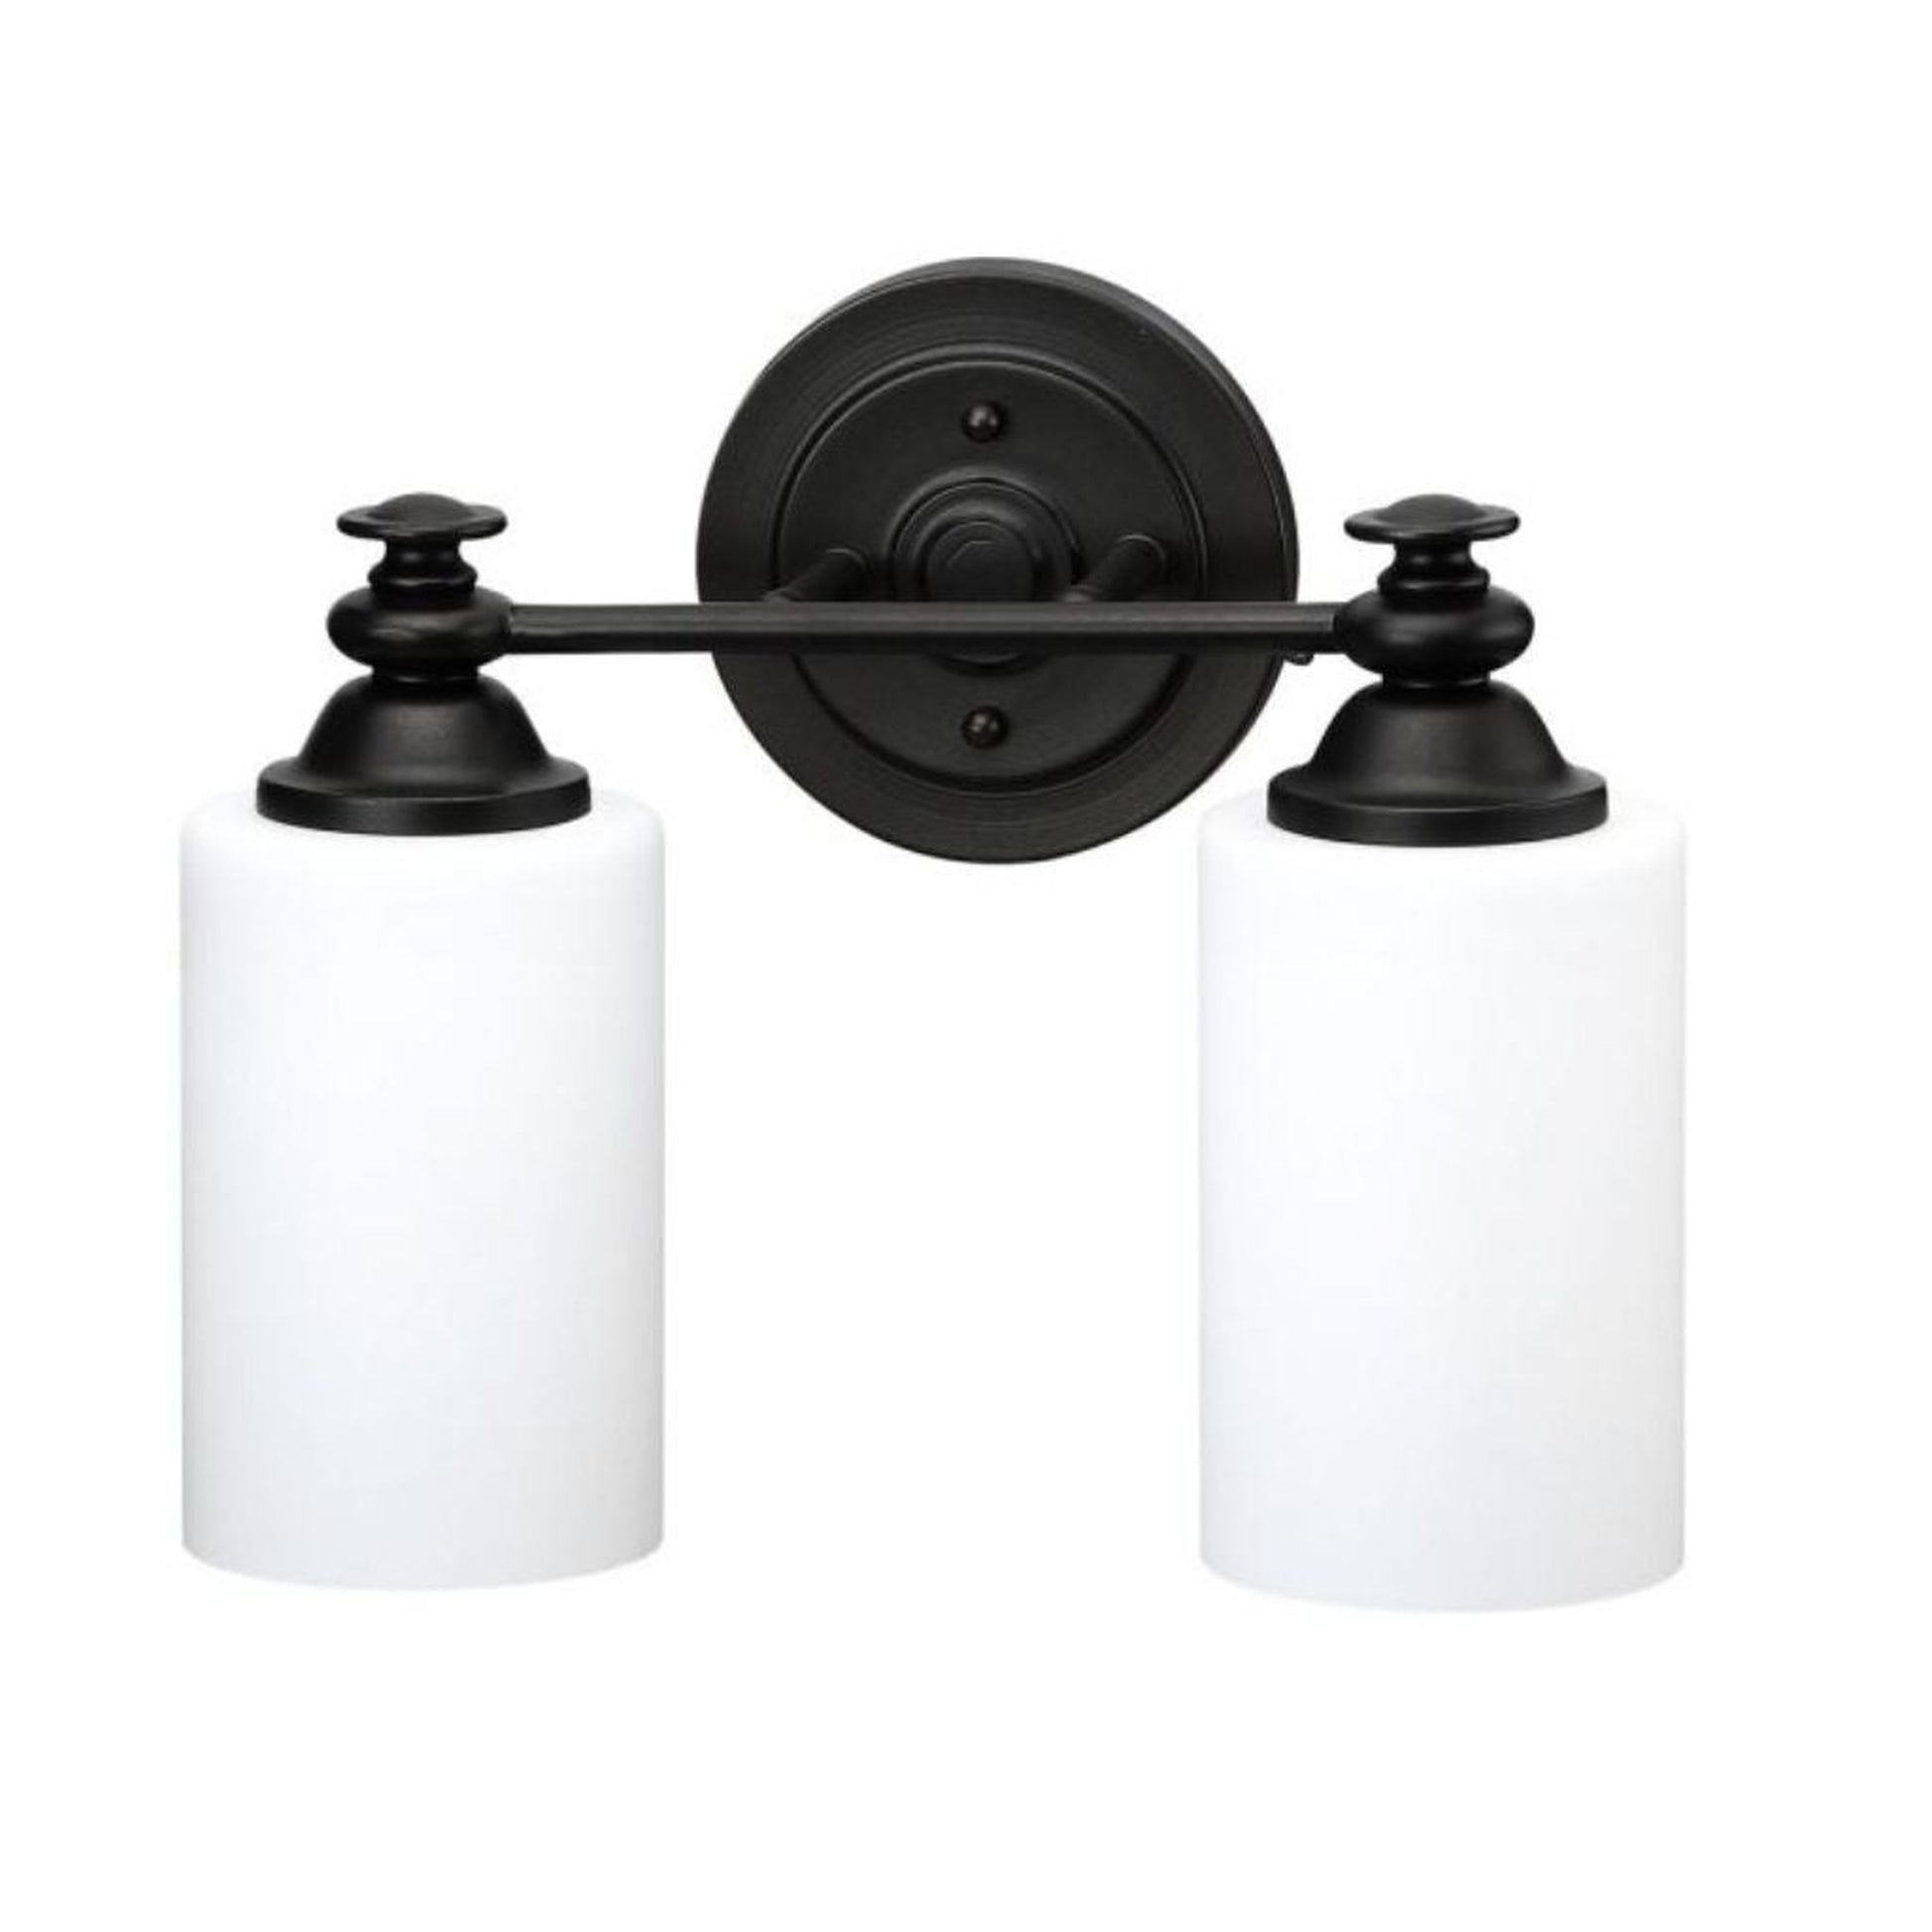 Craftmade Dardyn 13" 2-Light Espresso Vanity Light With White Frosted Glass Shades